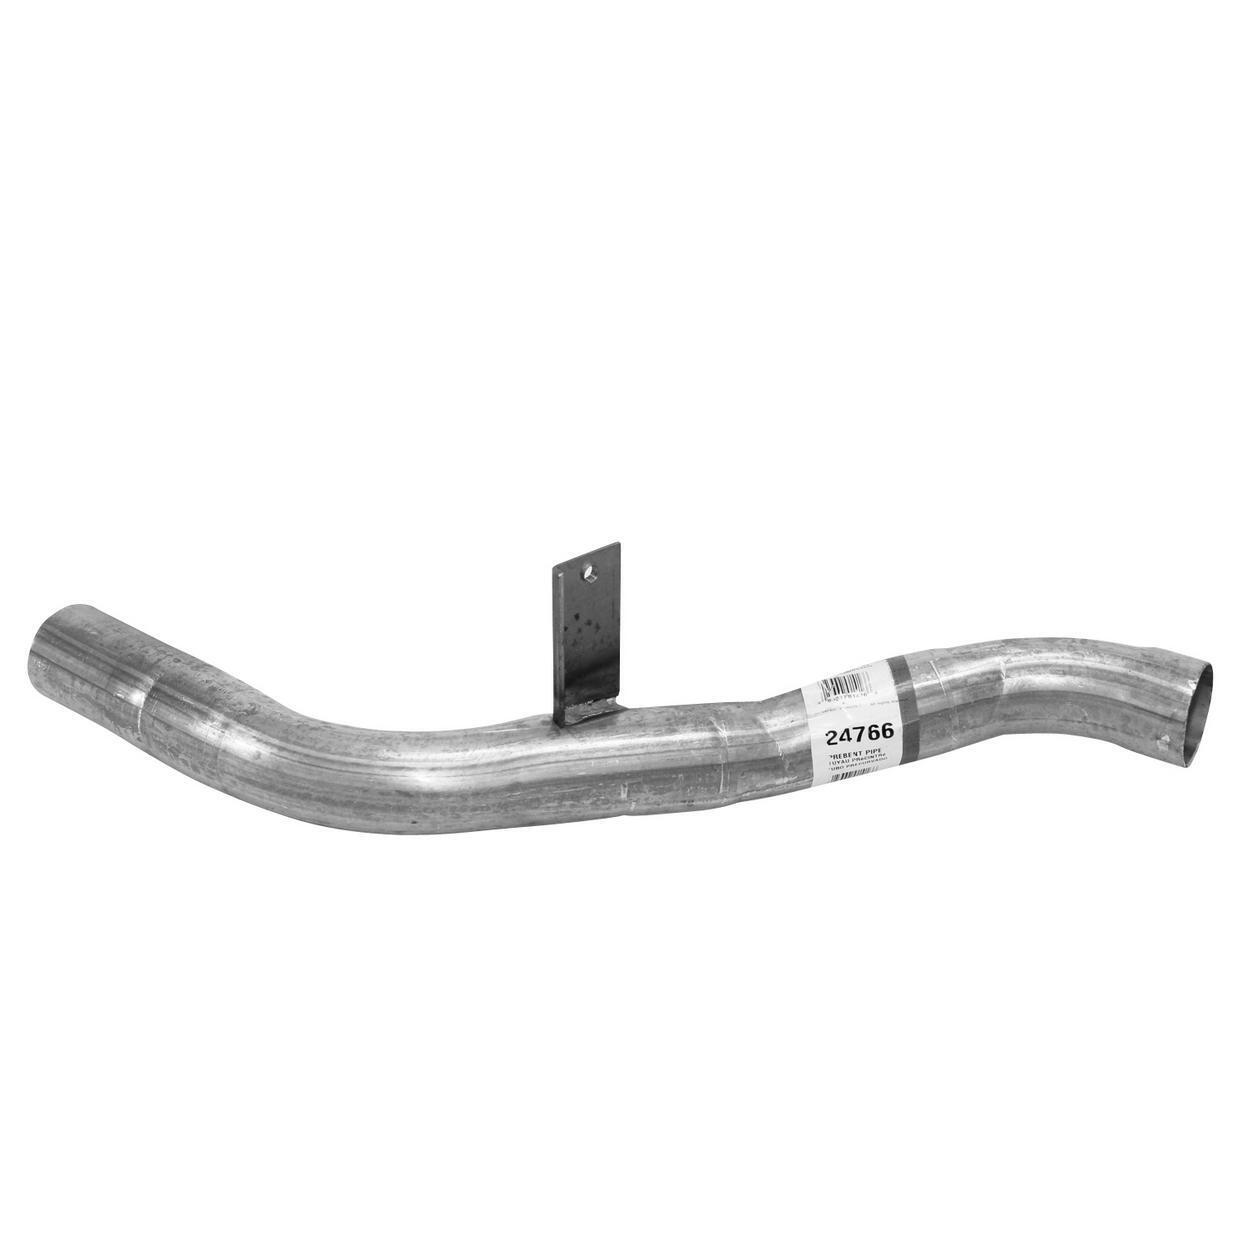 Exhaust Tail Pipe for 1986 Pontiac 6000 2.8L V6 GAS OHV